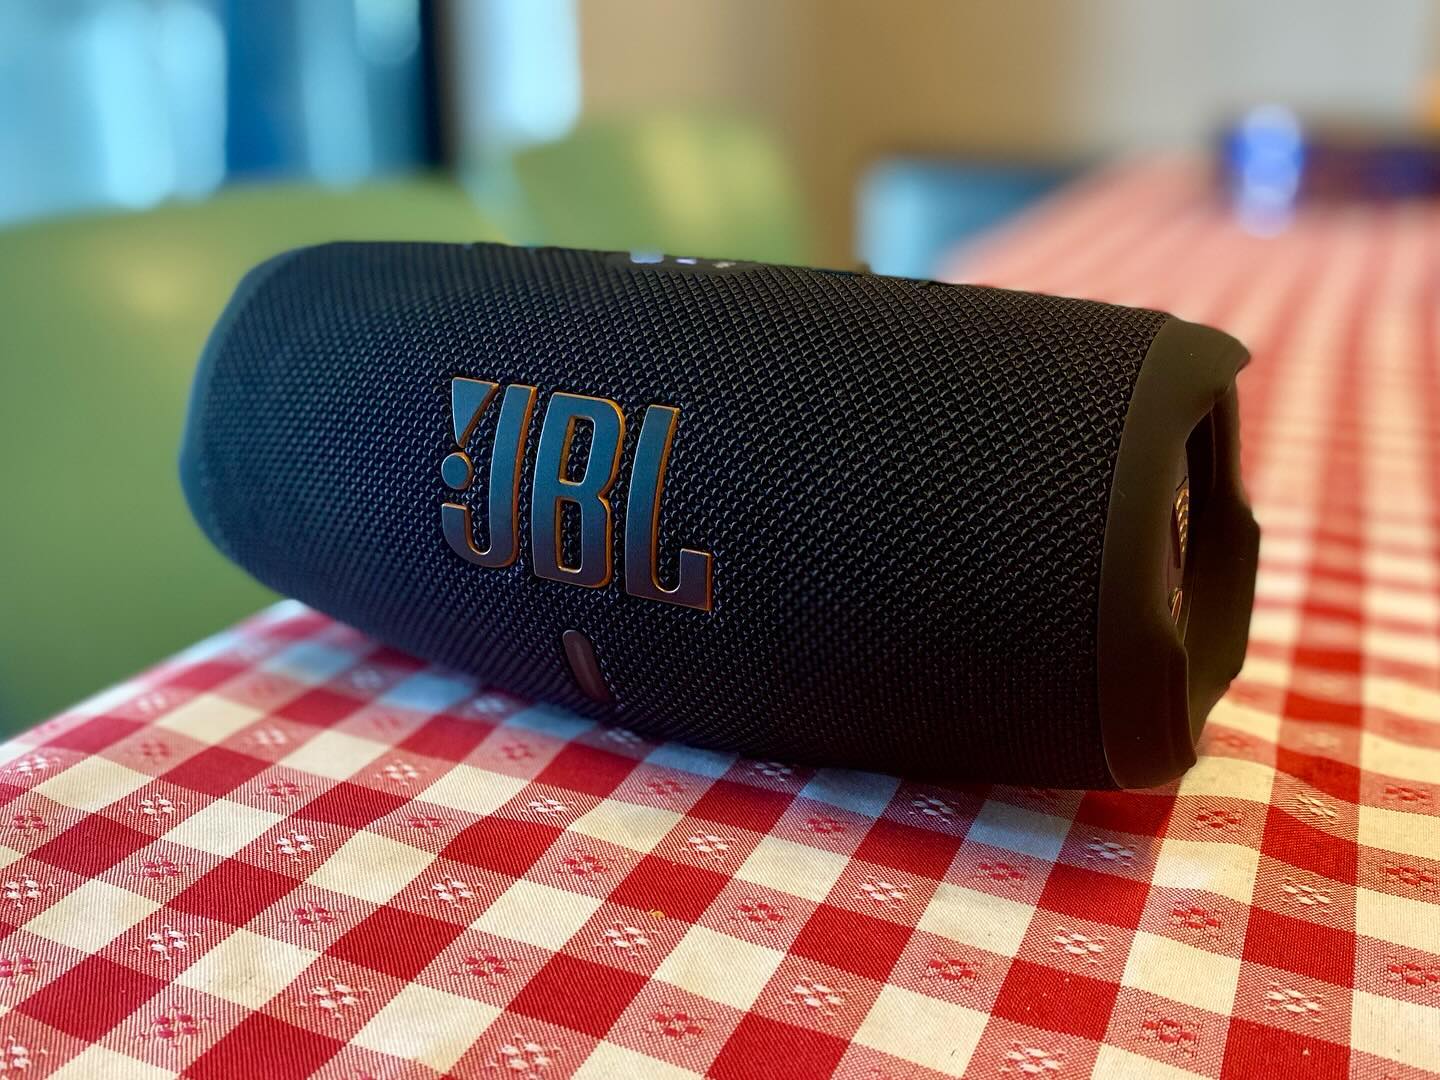 New speaker for gym JBL Charge 5 Wi-Fi